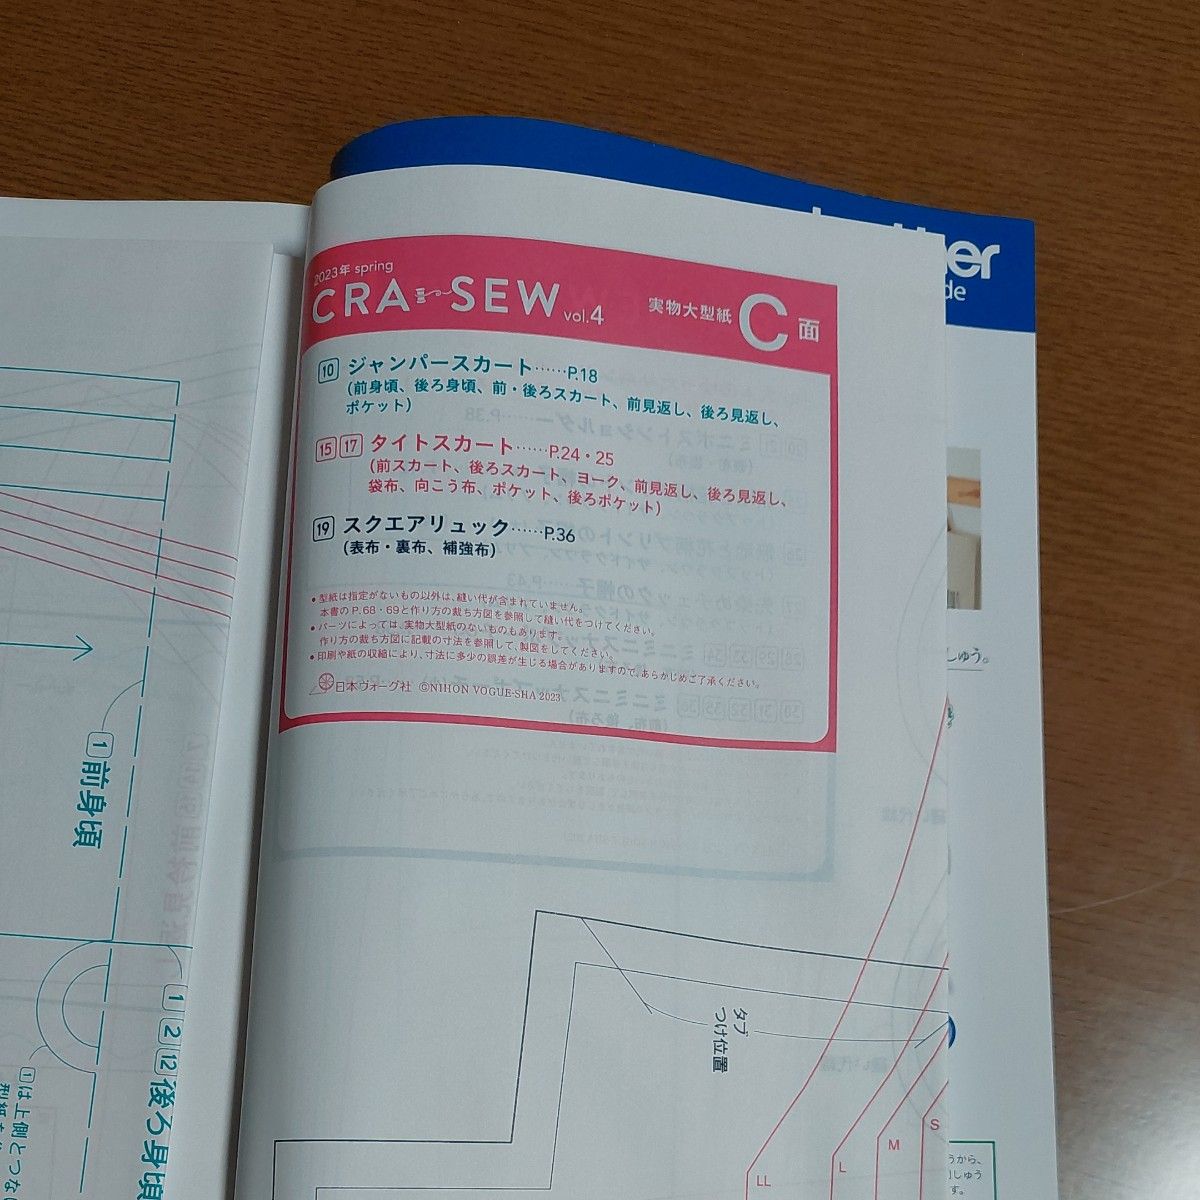 CRA-SEW vol.4 (Heart Warming Life Series)　表紙ワンピ&ブラウスの型紙付き 